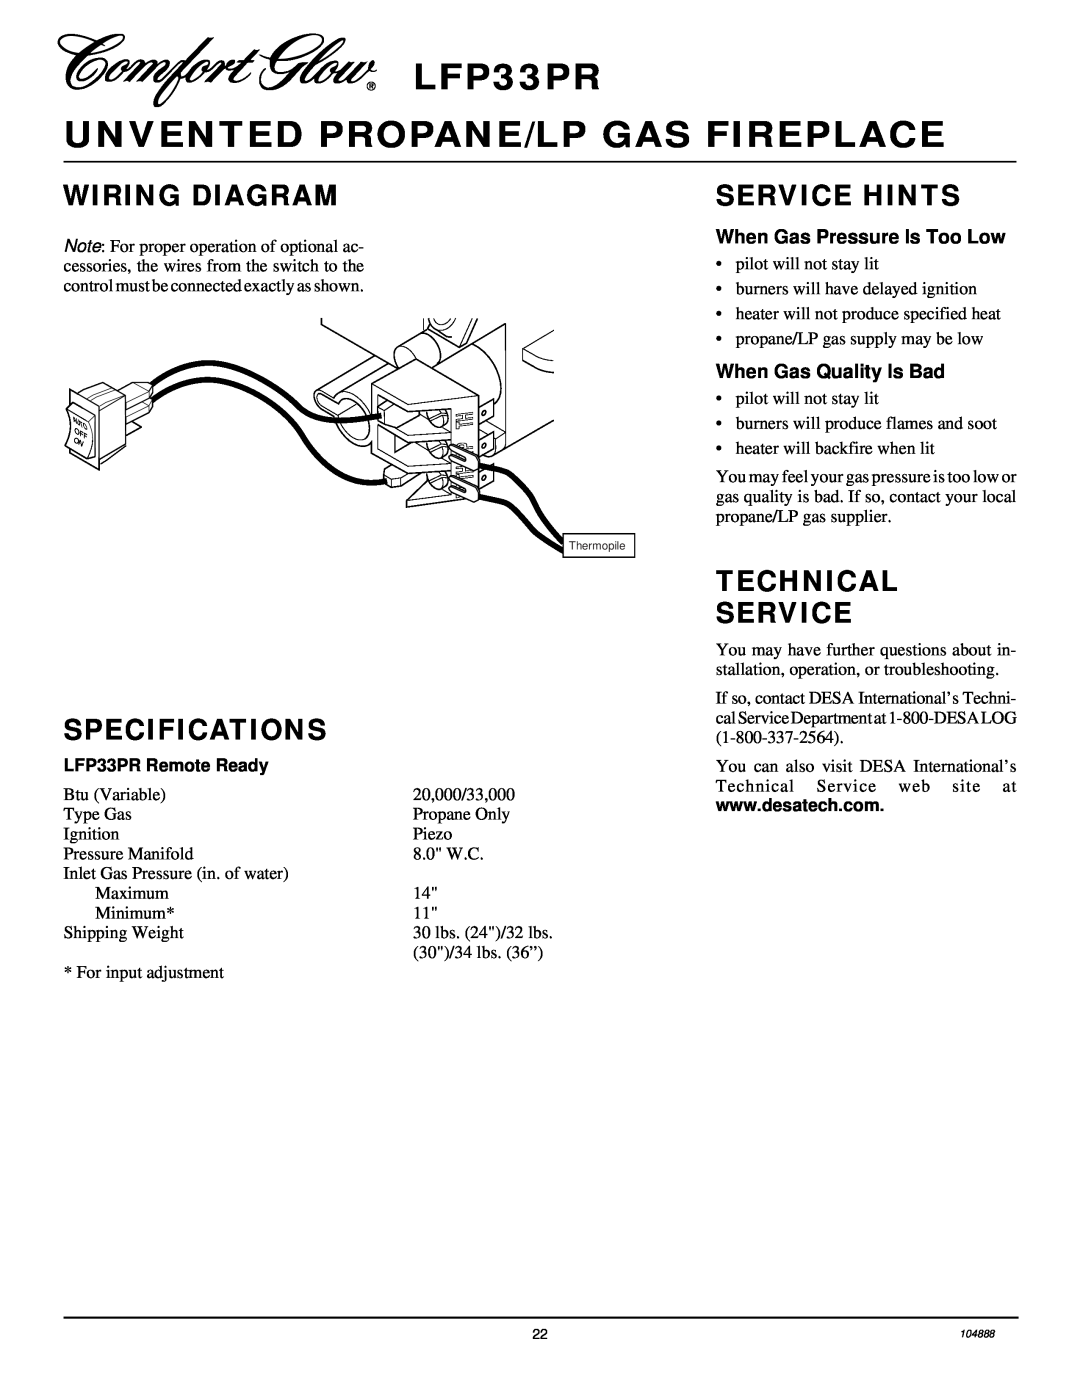 Desa Wiring Diagram, Service Hints, Specifications, Technical Service, LFP33PR UNVENTED PROPANE/LP GAS FIREPLACE 